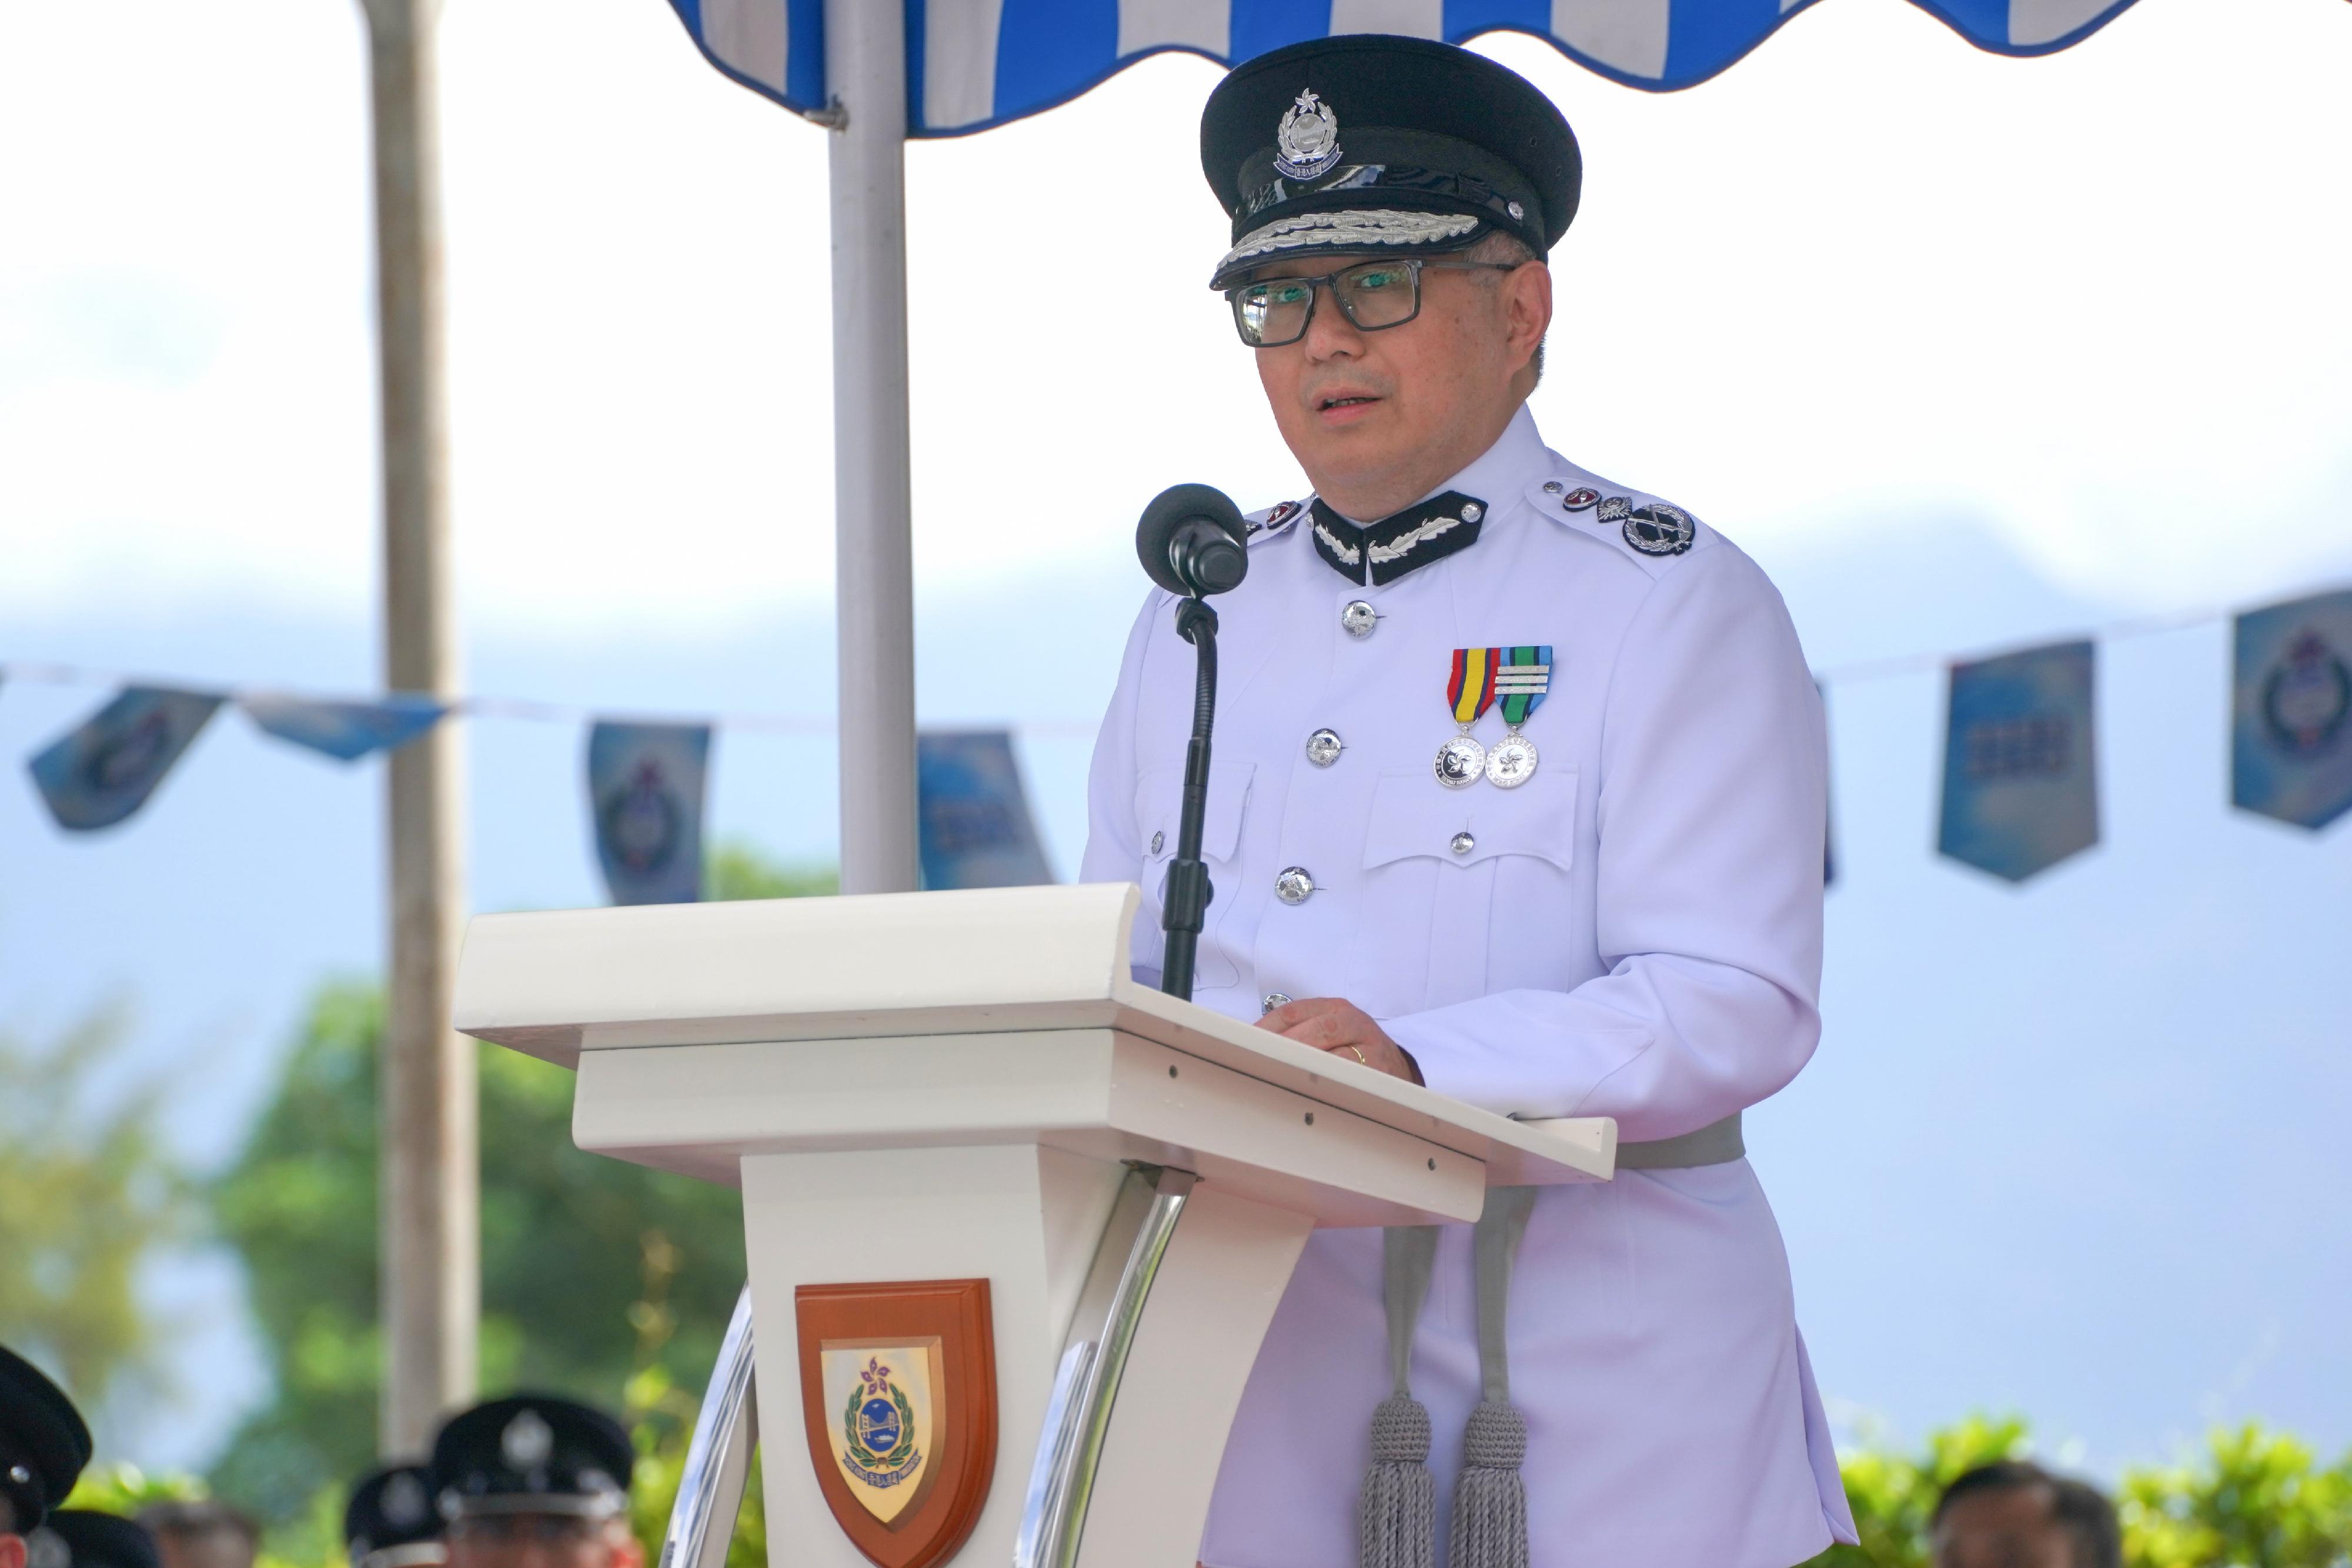 The Director of Immigration, Mr Au Ka-wang, delivers a speech at the Immigration Service Institute of Training and Development Passing-out Parade today (September 13).